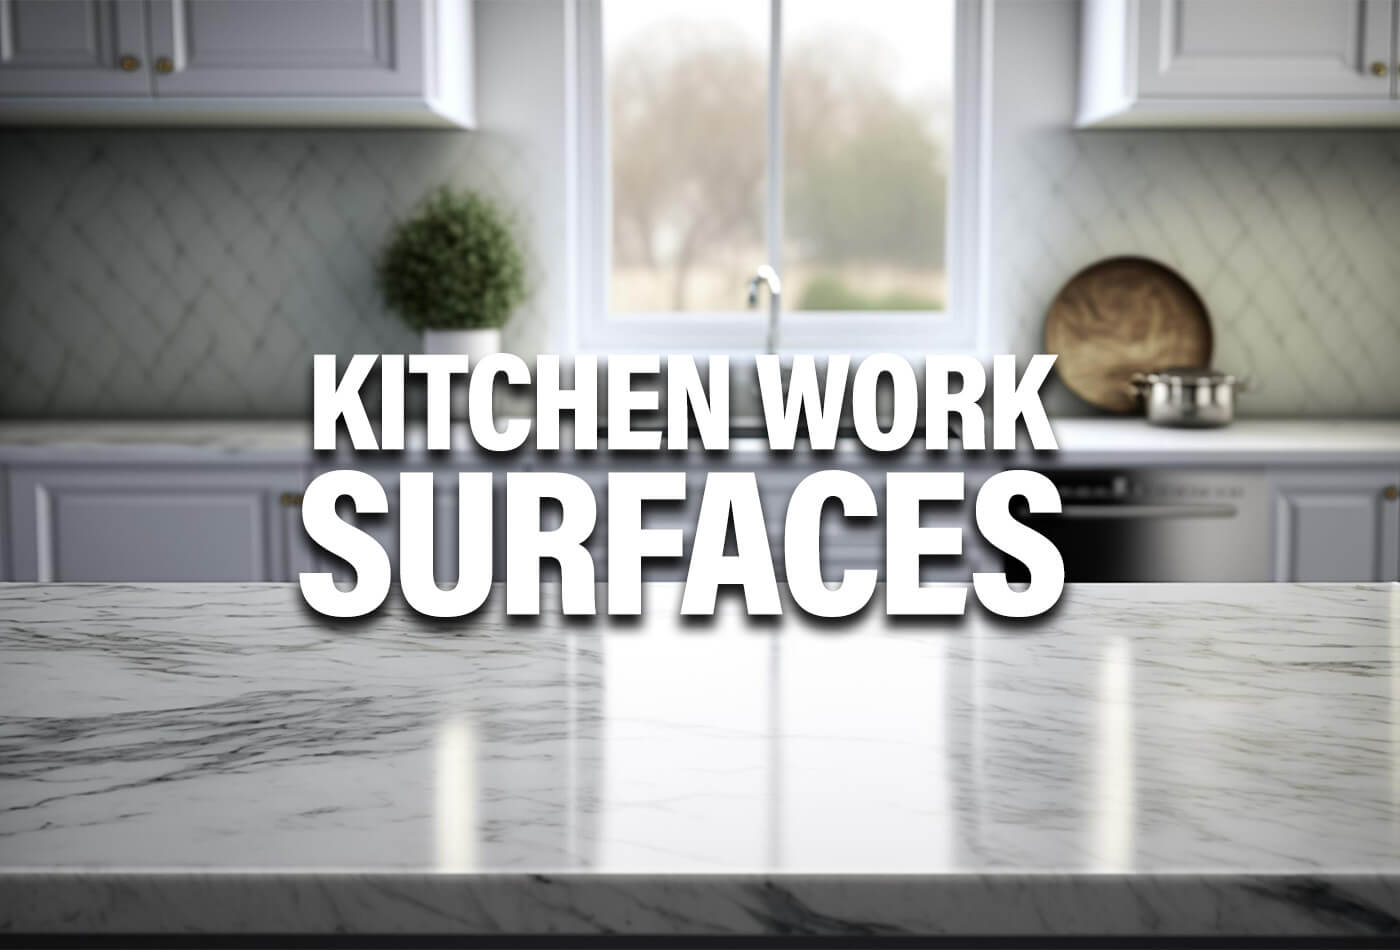 Top Kitchen Work Surfaces: Perfect Blend of Form & Function